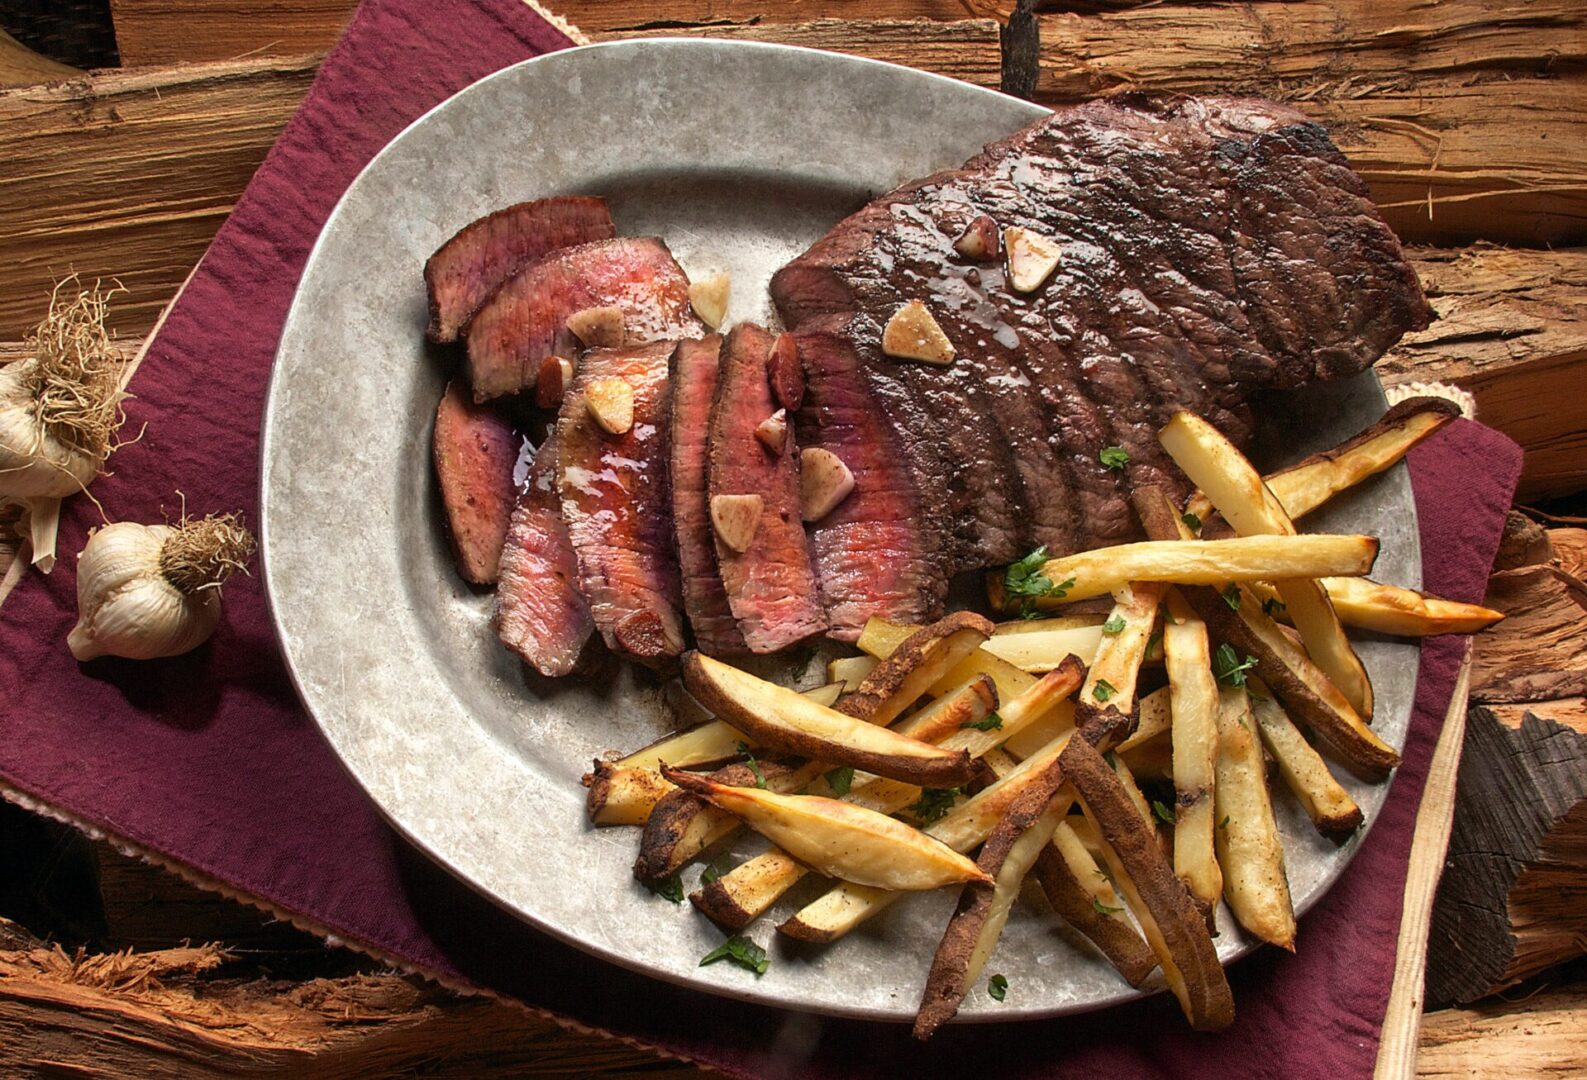 Steak frites, and two garlic placed besides it